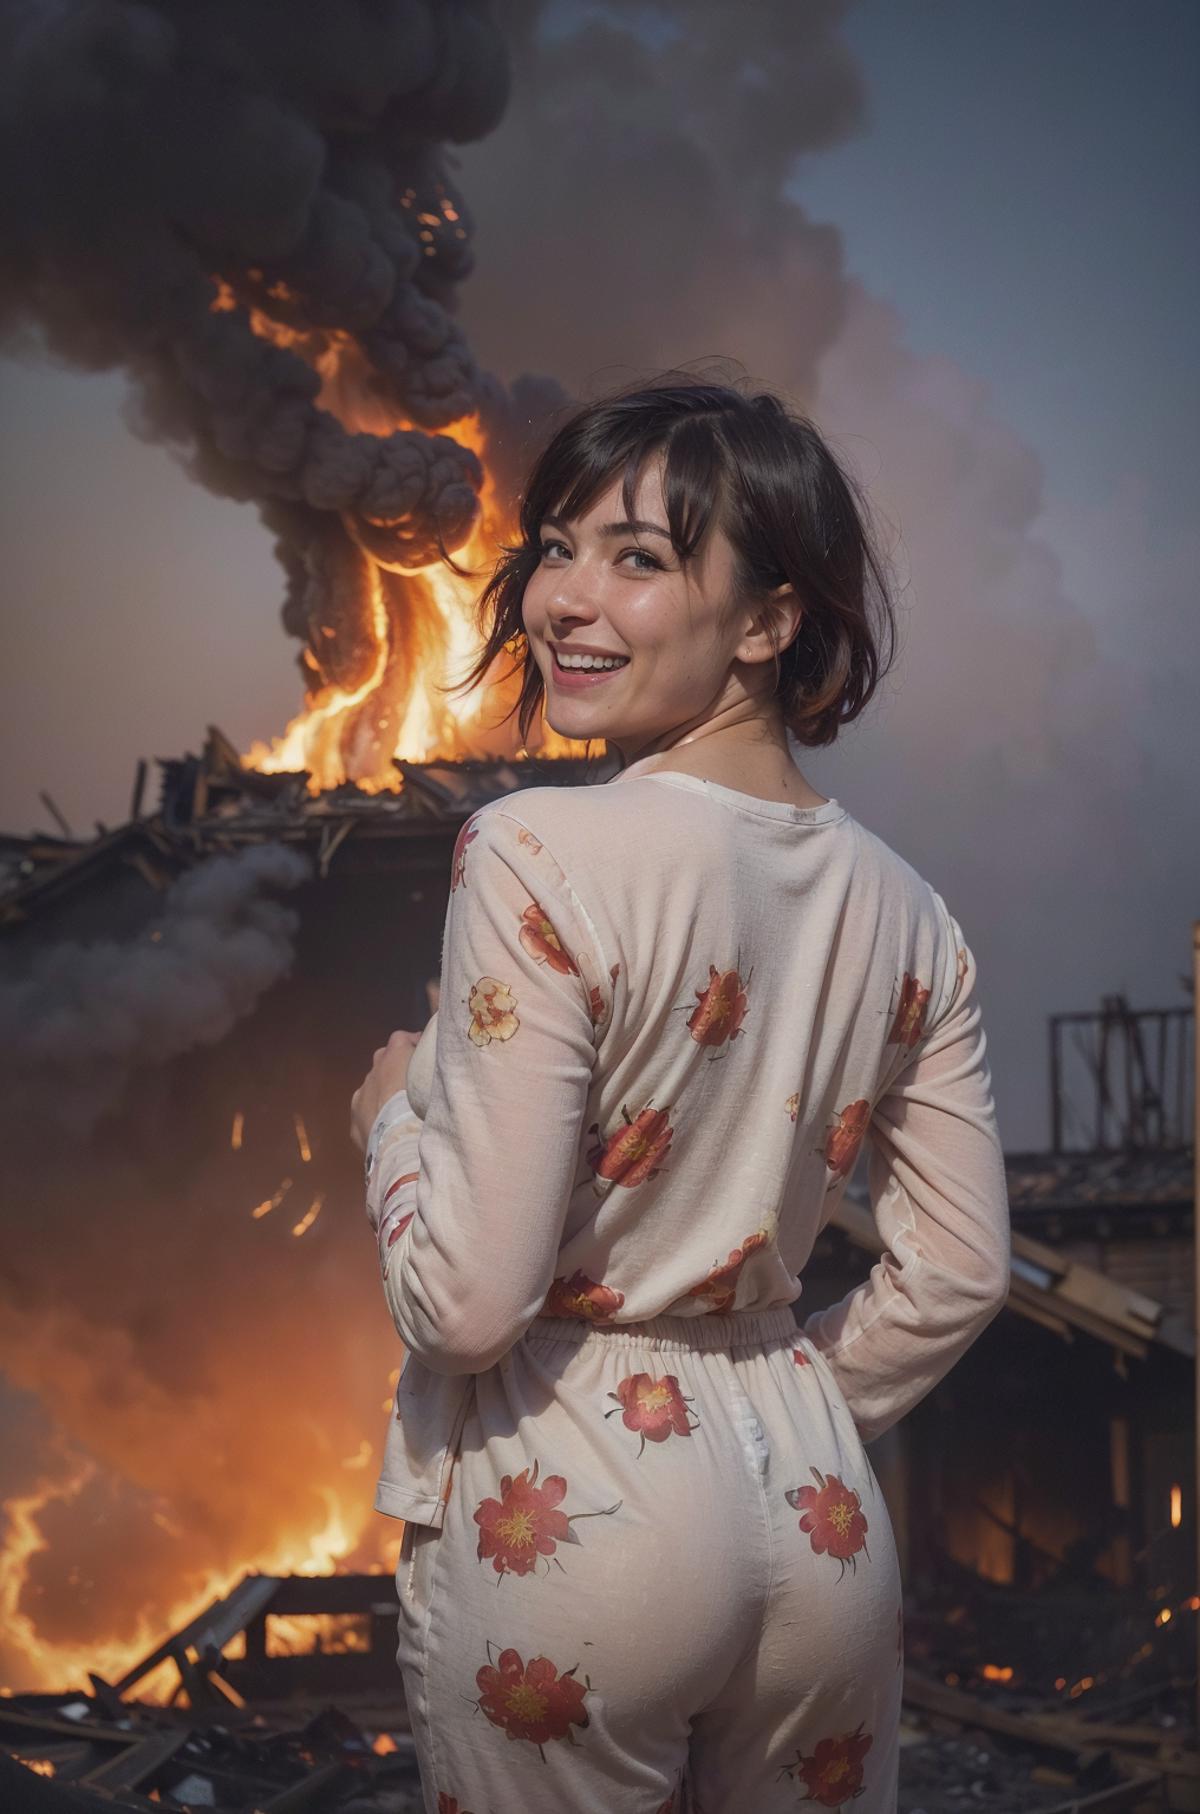 A woman with a flower dress standing in front of a burning building.